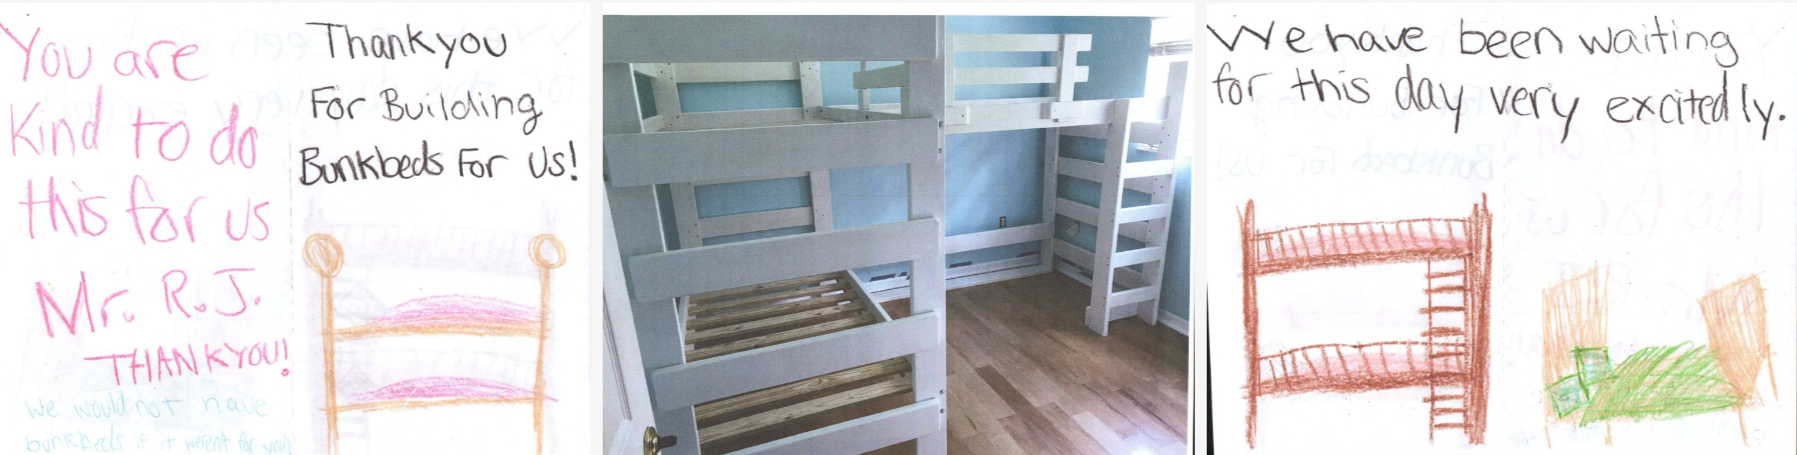 little kid drawing of bunkbed